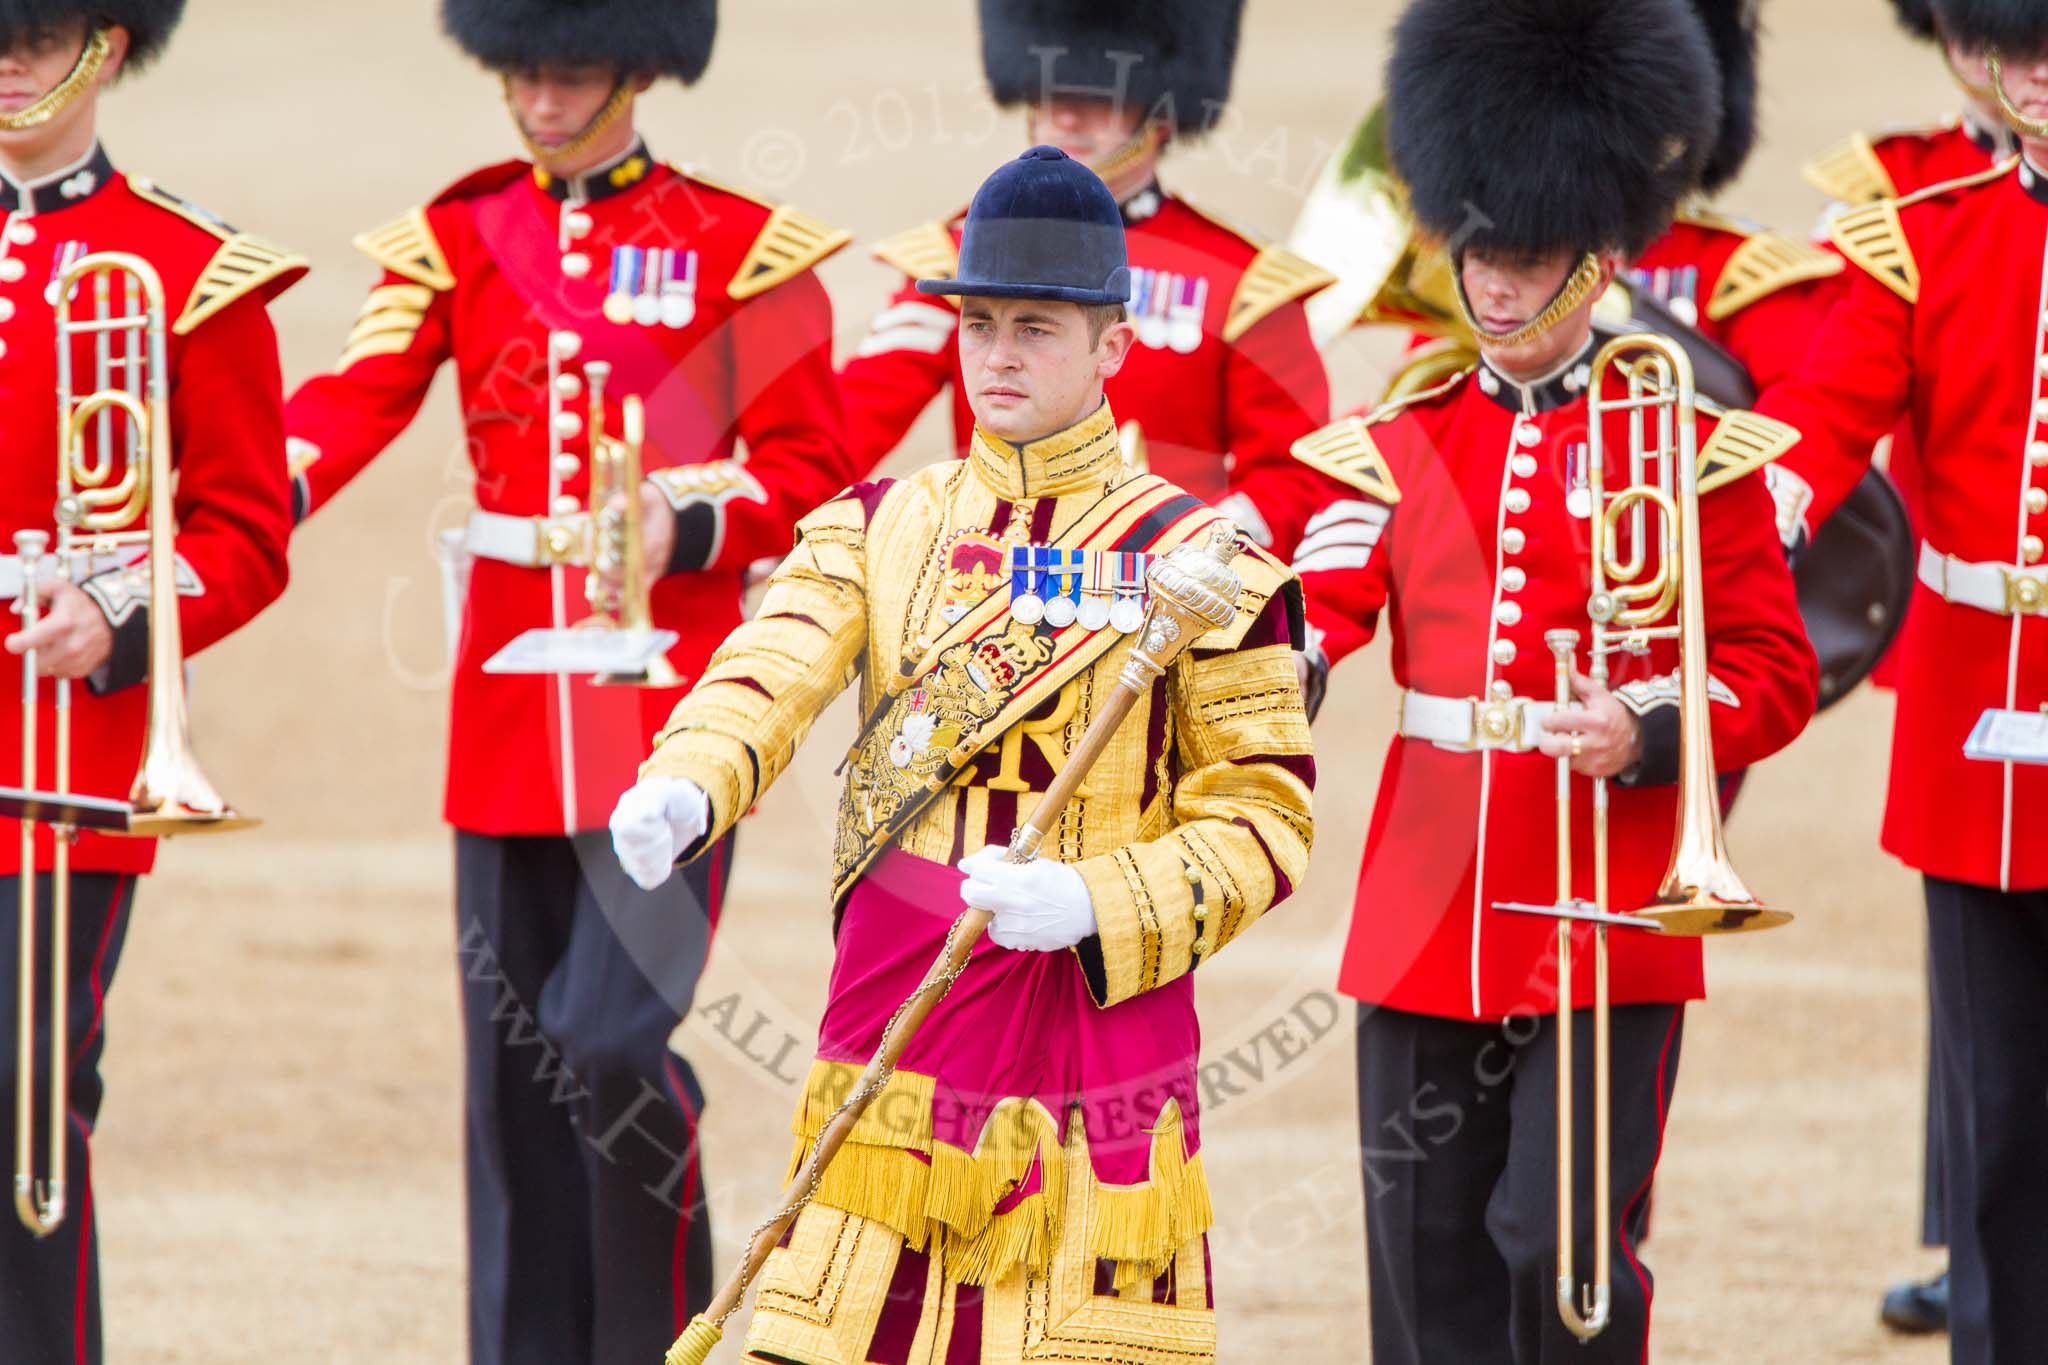 Trooping the Colour 2013: Drum Major D P Thomas, Grenadier Guards, leading the Band of the Grenadier Guards onto Horse Guards Parade..
Horse Guards Parade, Westminster,
London SW1,

United Kingdom,
on 15 June 2013 at 10:29, image #97